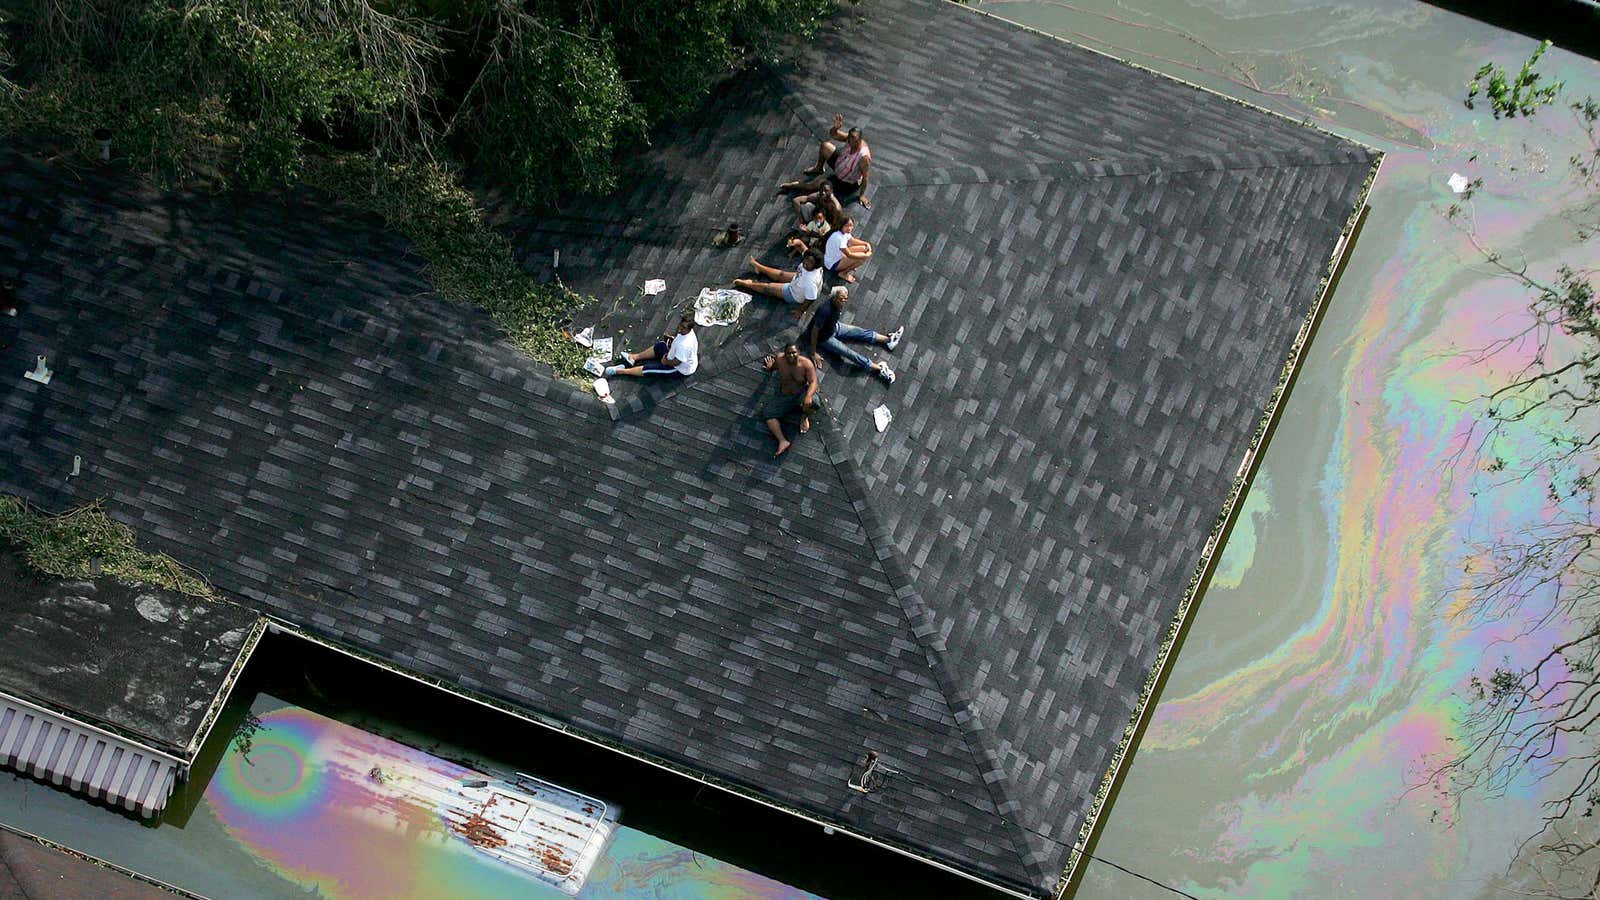 People stranded on a roof in New Orleans by Hurricane Katrina&#39;s floodwaters 15 years ago today.